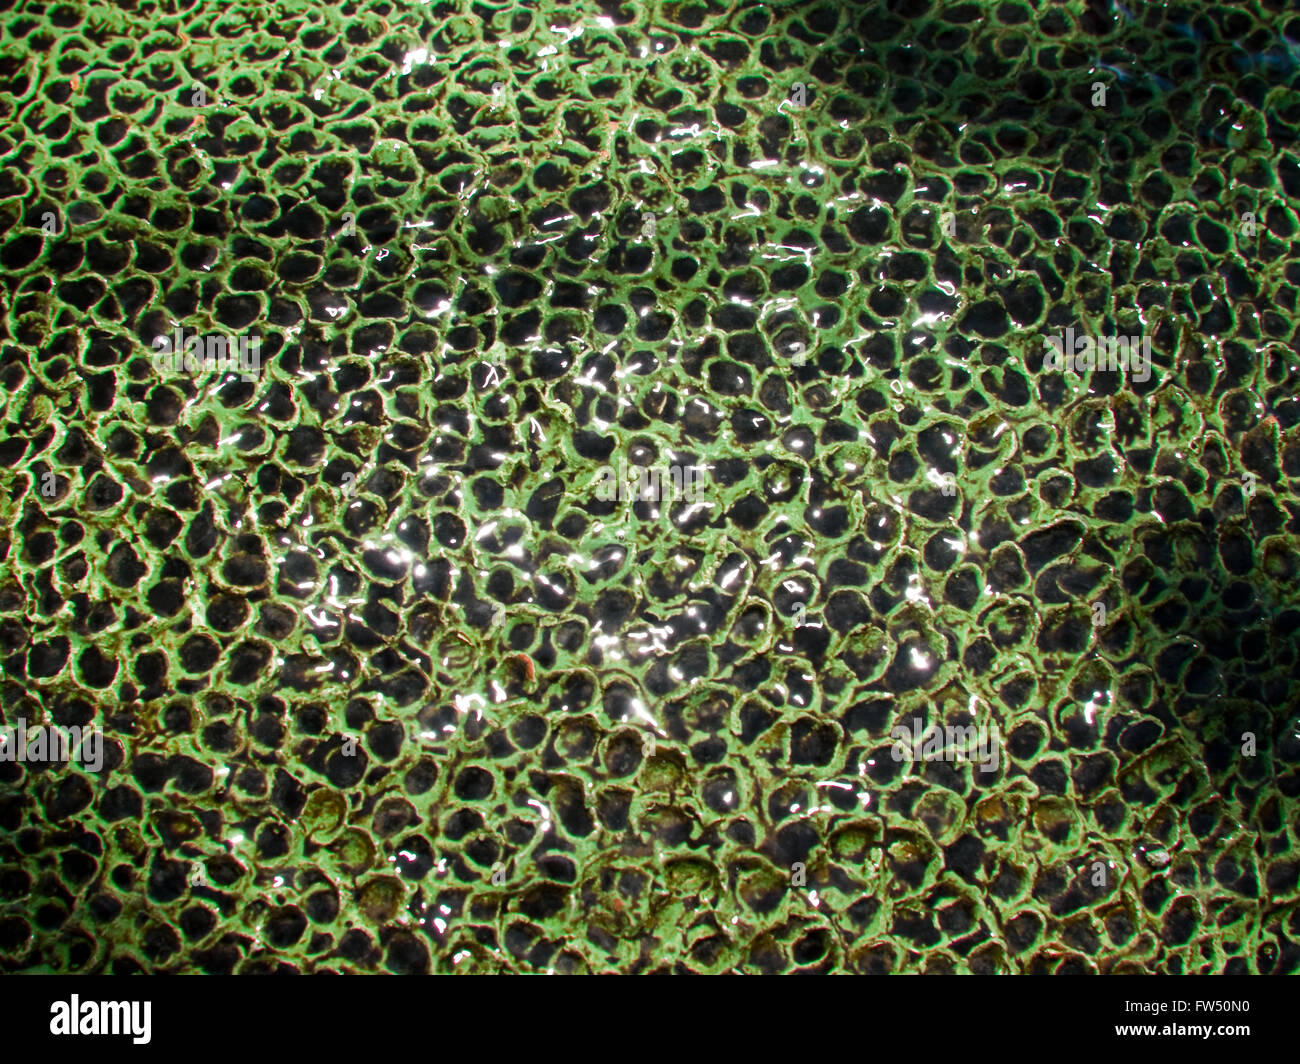 Green wet rough surface Stock Photo